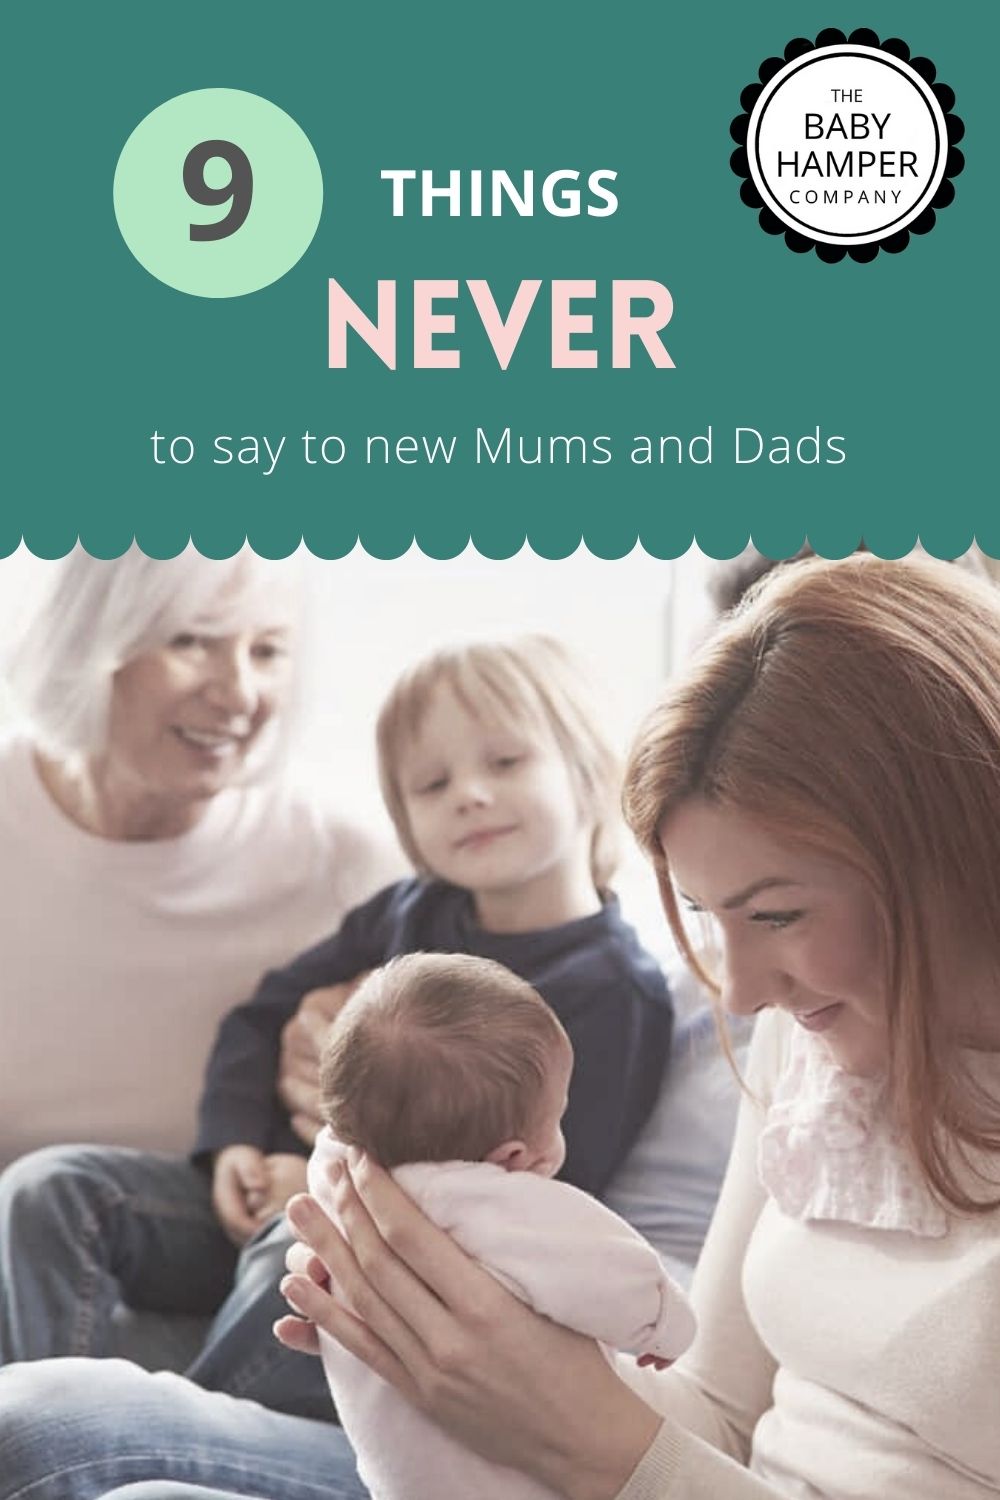 Things NEVER to say to new Mums and Dads